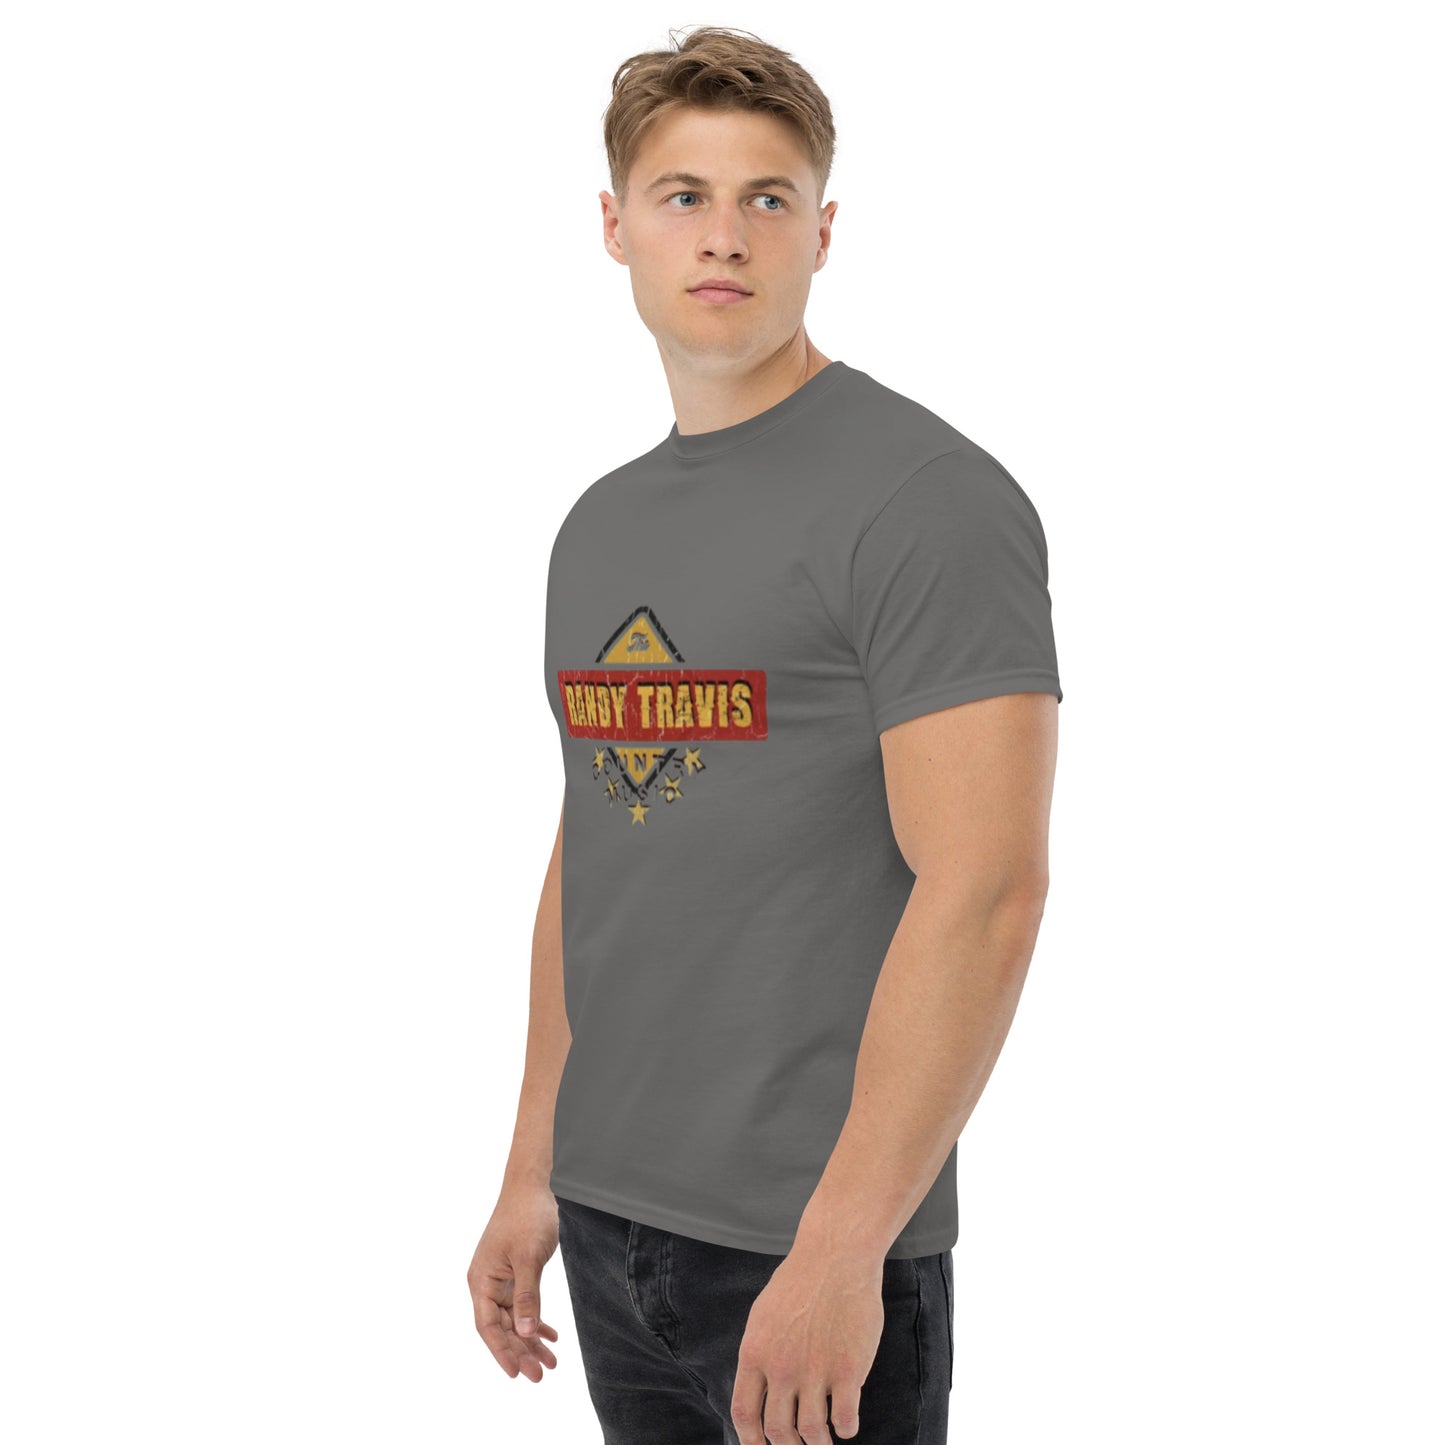 The Randy Travis Country Music | Classic Country Tees - Classic Country Tees